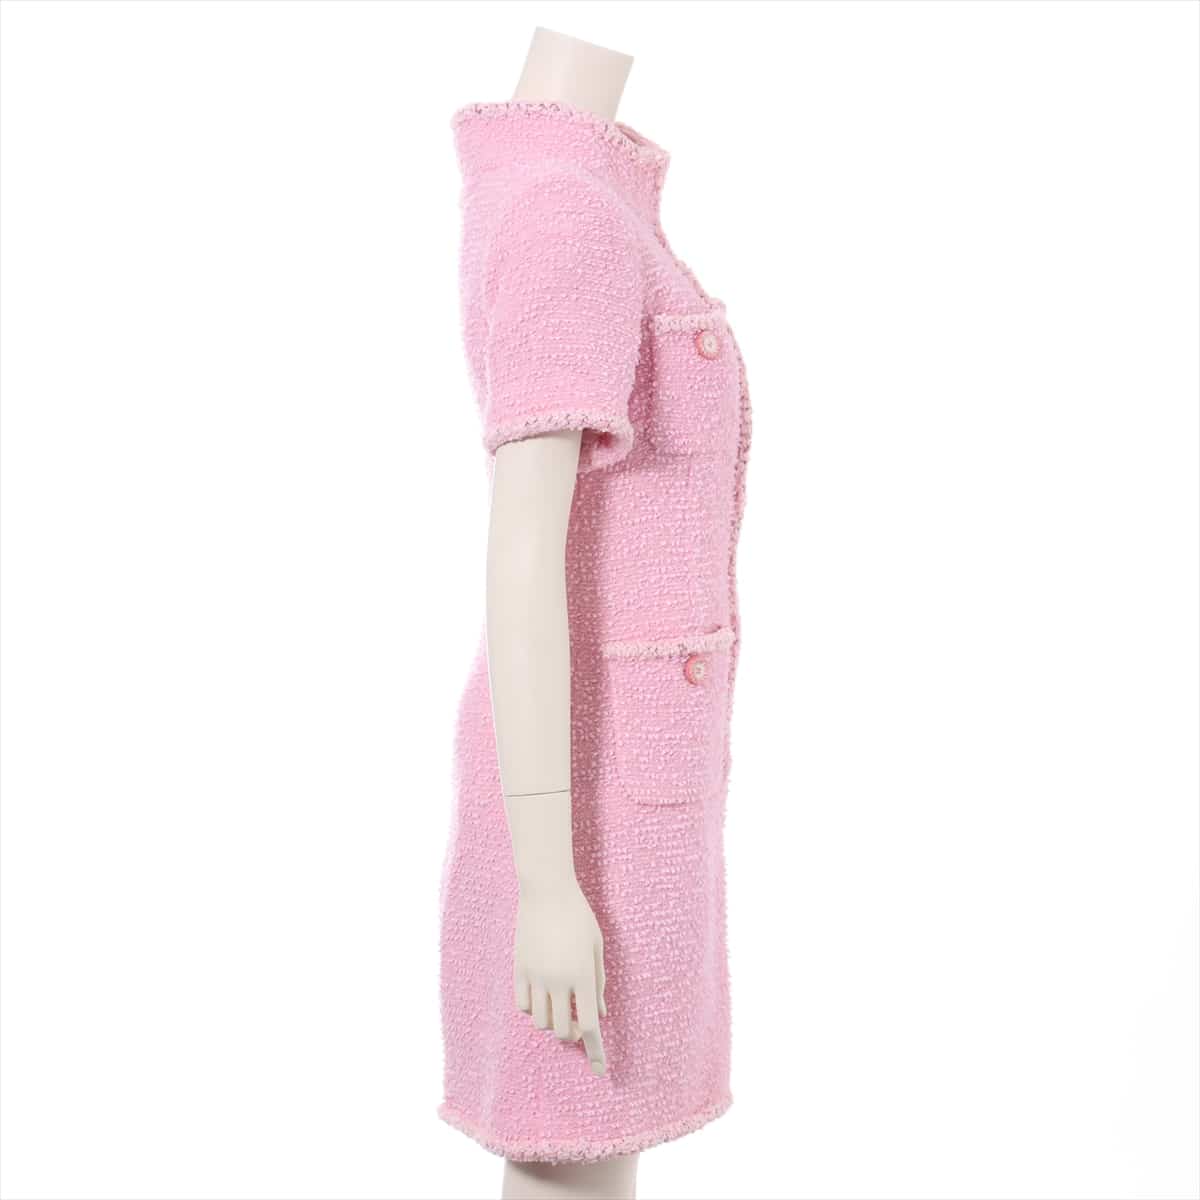 Chanel Coco Button 19C Tweed Dress 34 Ladies' Pink